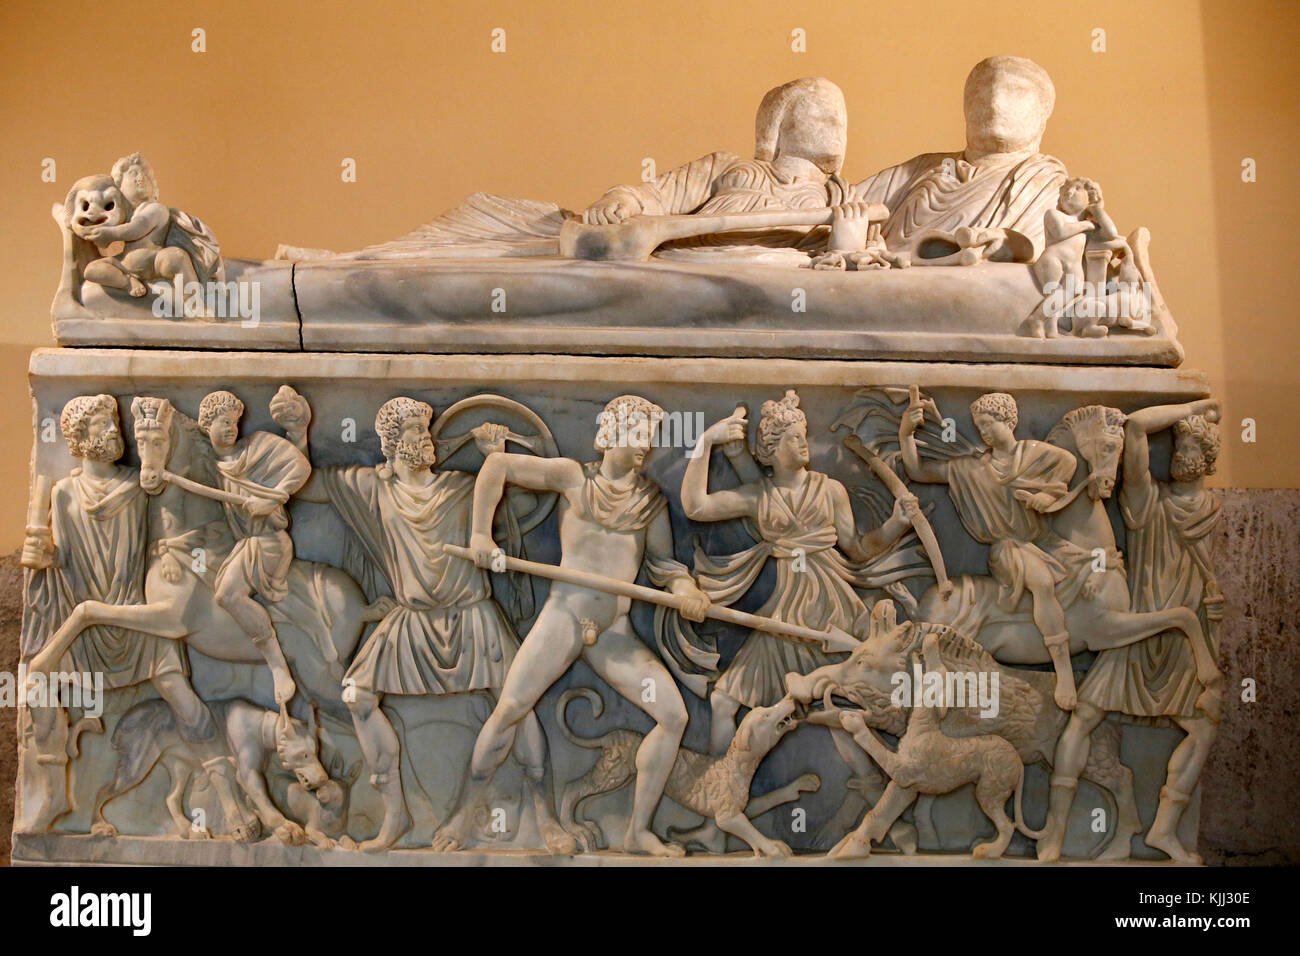 Capitoline museum, Rome. Sarcophagus with the Calydonian boar hunt. M.C. inv. 917, Proconnesian marble. Italy. Stock Photo